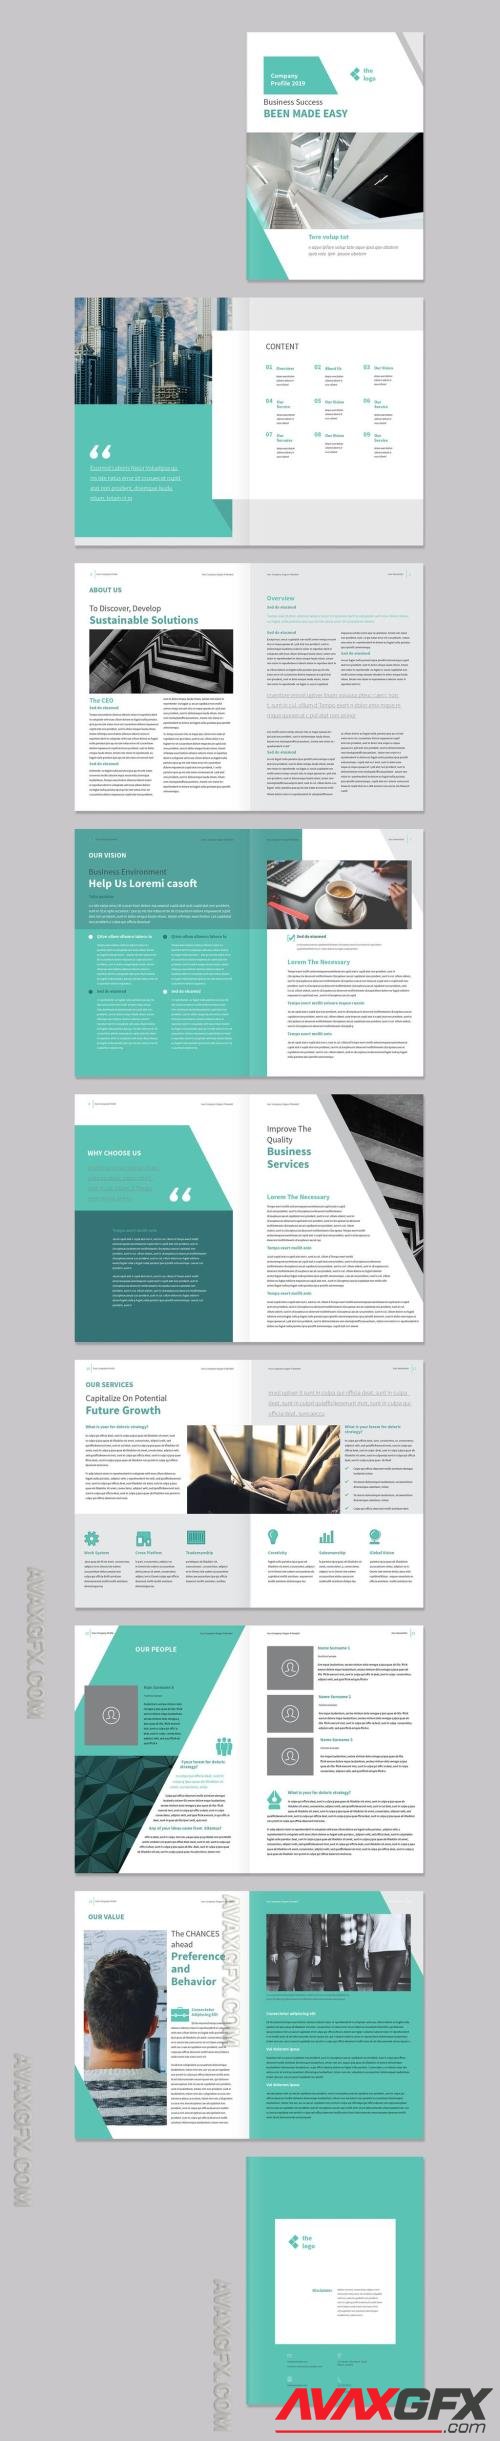 Brochure Layout with Green Accents 220996741 [Adobestock]